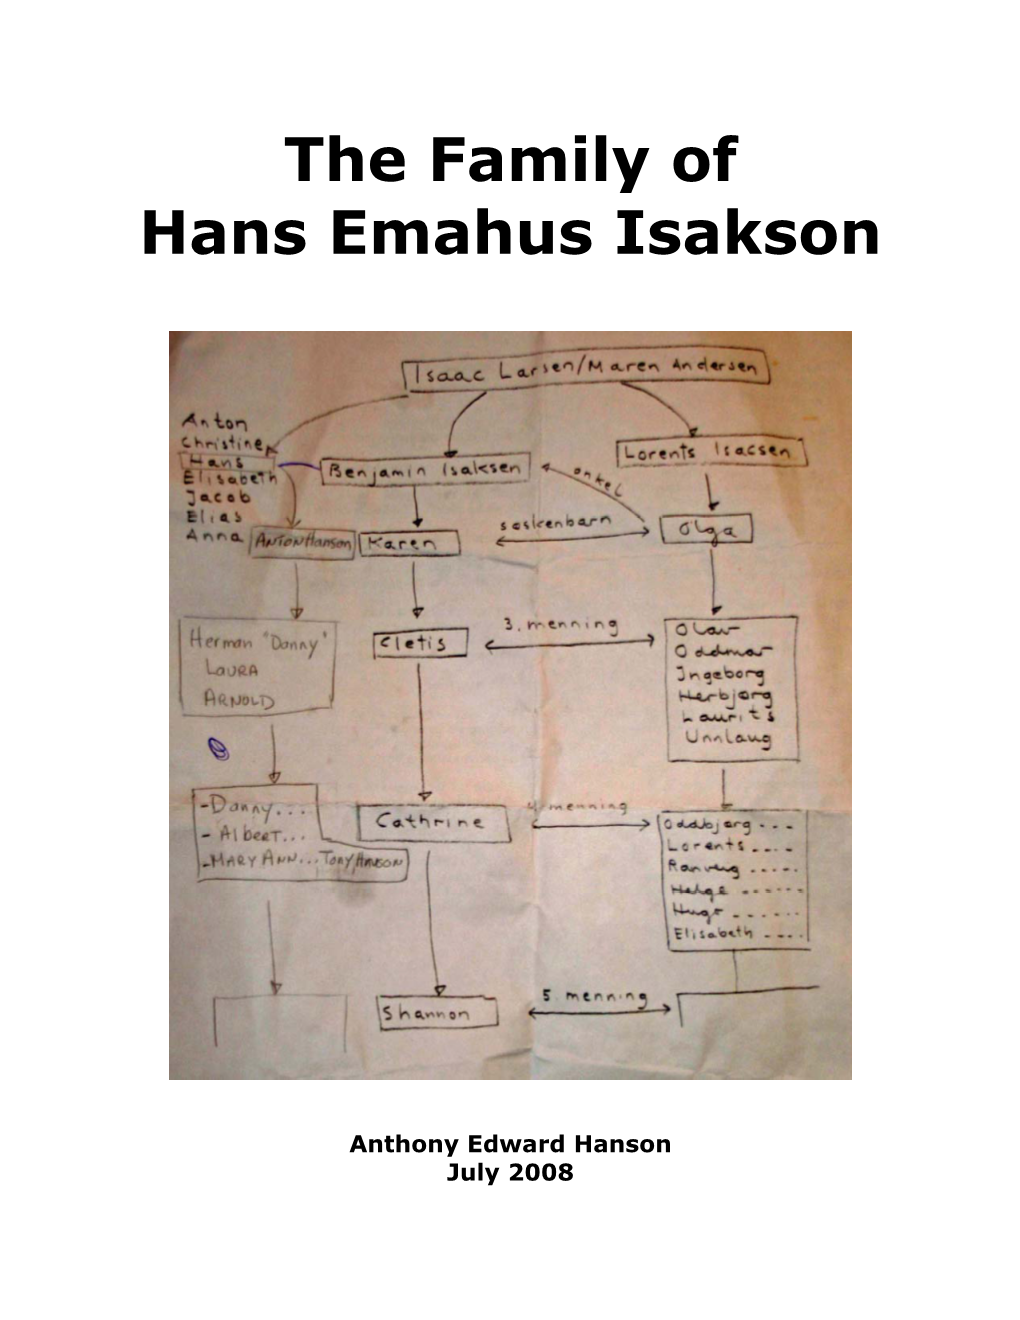 The Family of Hans Emahus Isakson